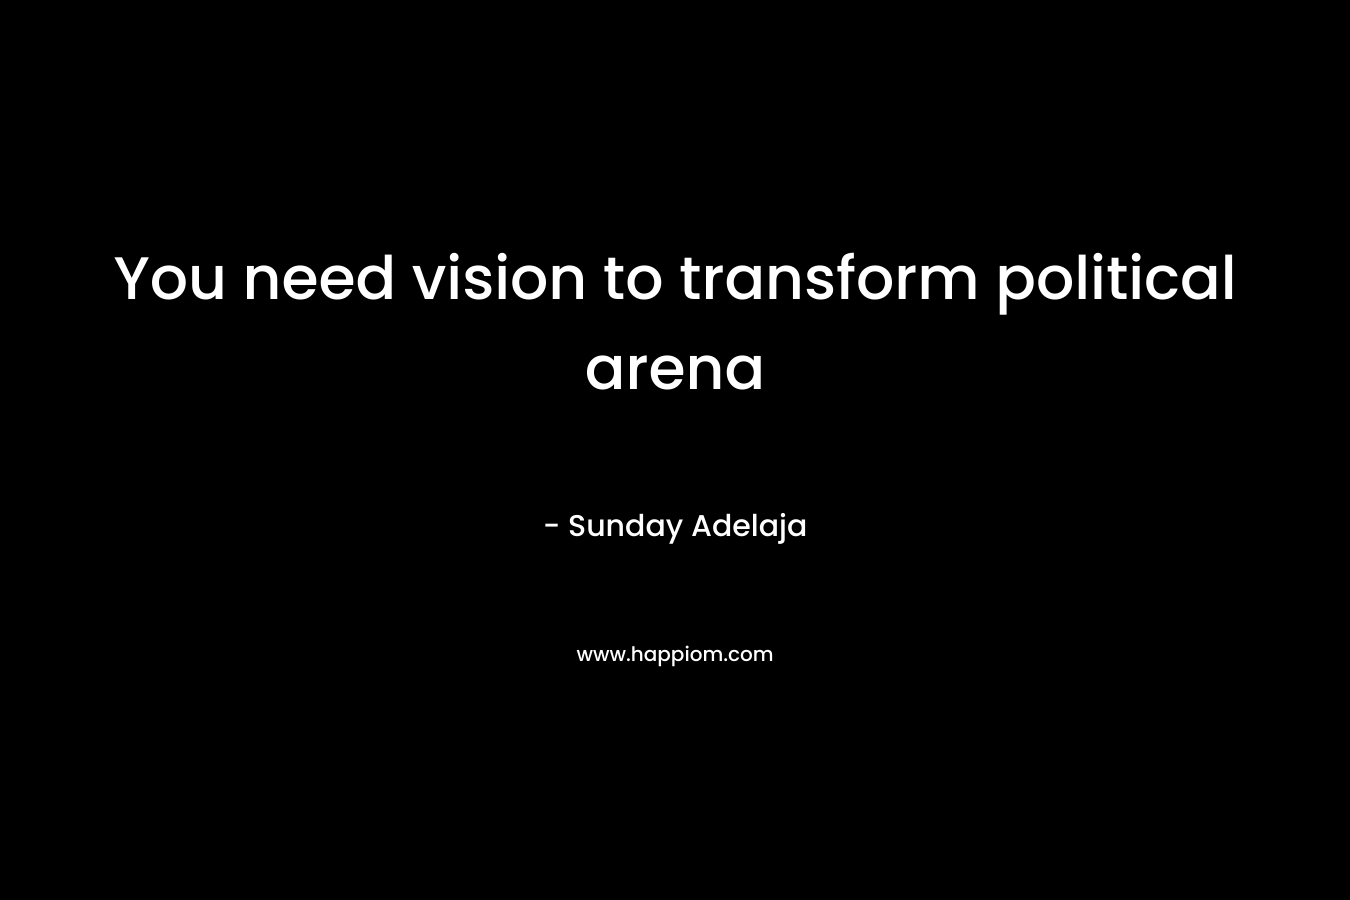 You need vision to transform political arena